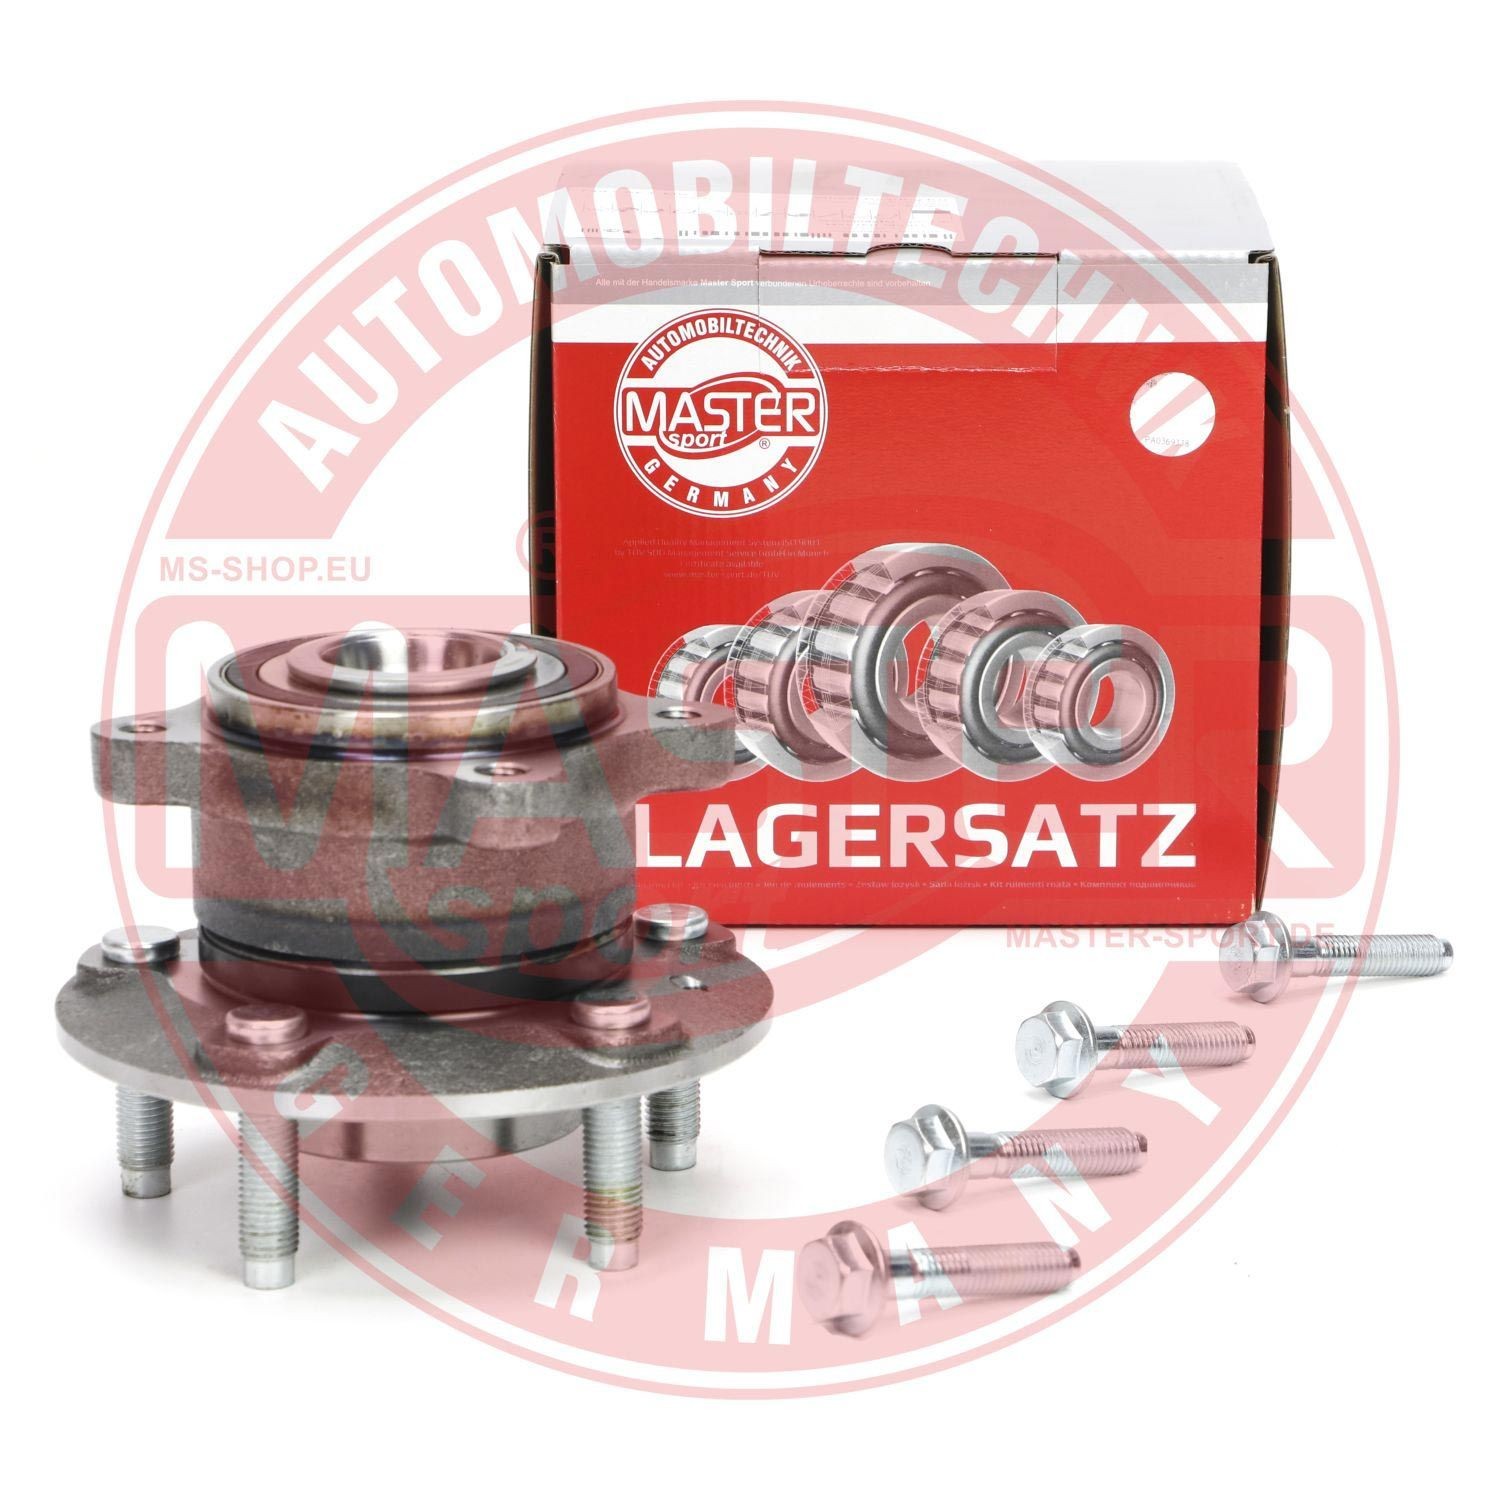 MASTER-SPORT HD190074931 Wheel bearing & wheel bearing kit with integrated ABS sensor, with integrated magnetic sensor ring